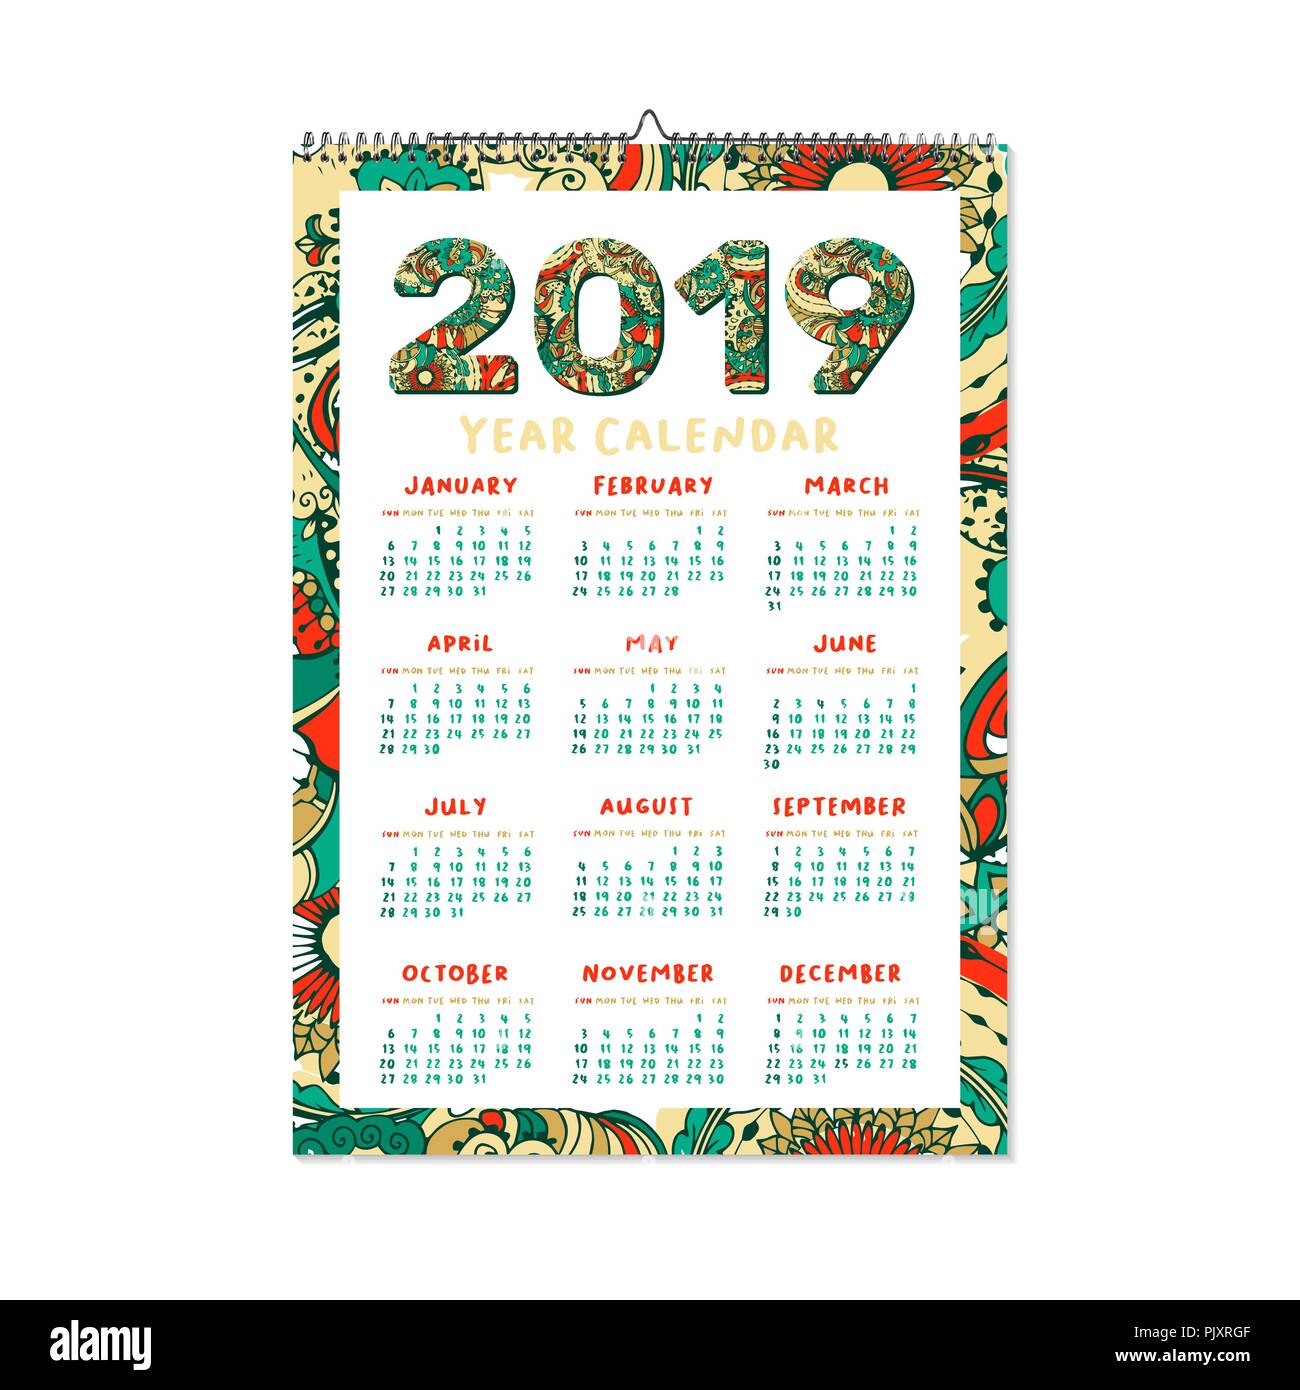 2019 Year Calendar. Xmas or Happy New Year Holiday Design. Isolated Vector Poster with Decorative Doodles Frame. Vertical Template Stock Vector